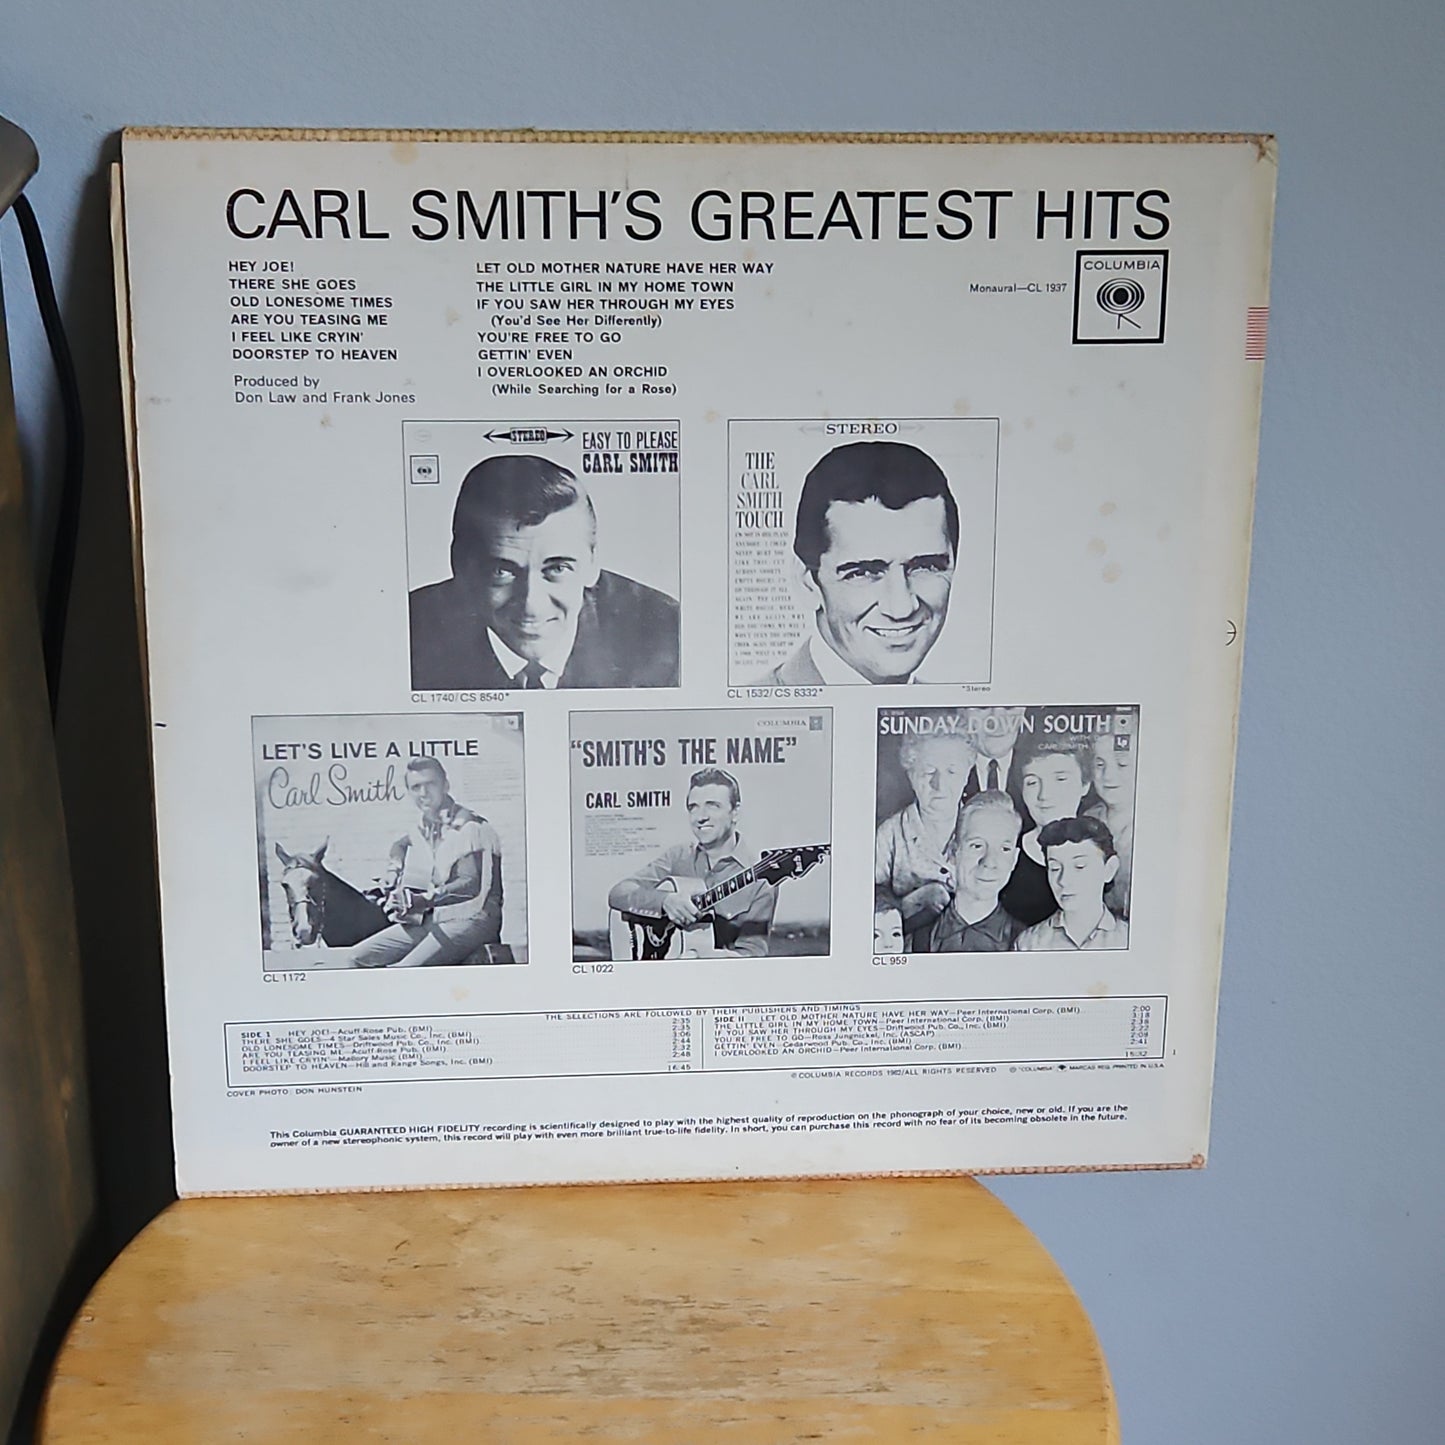 Carl Smith's Greatest Hits By Columbia Records